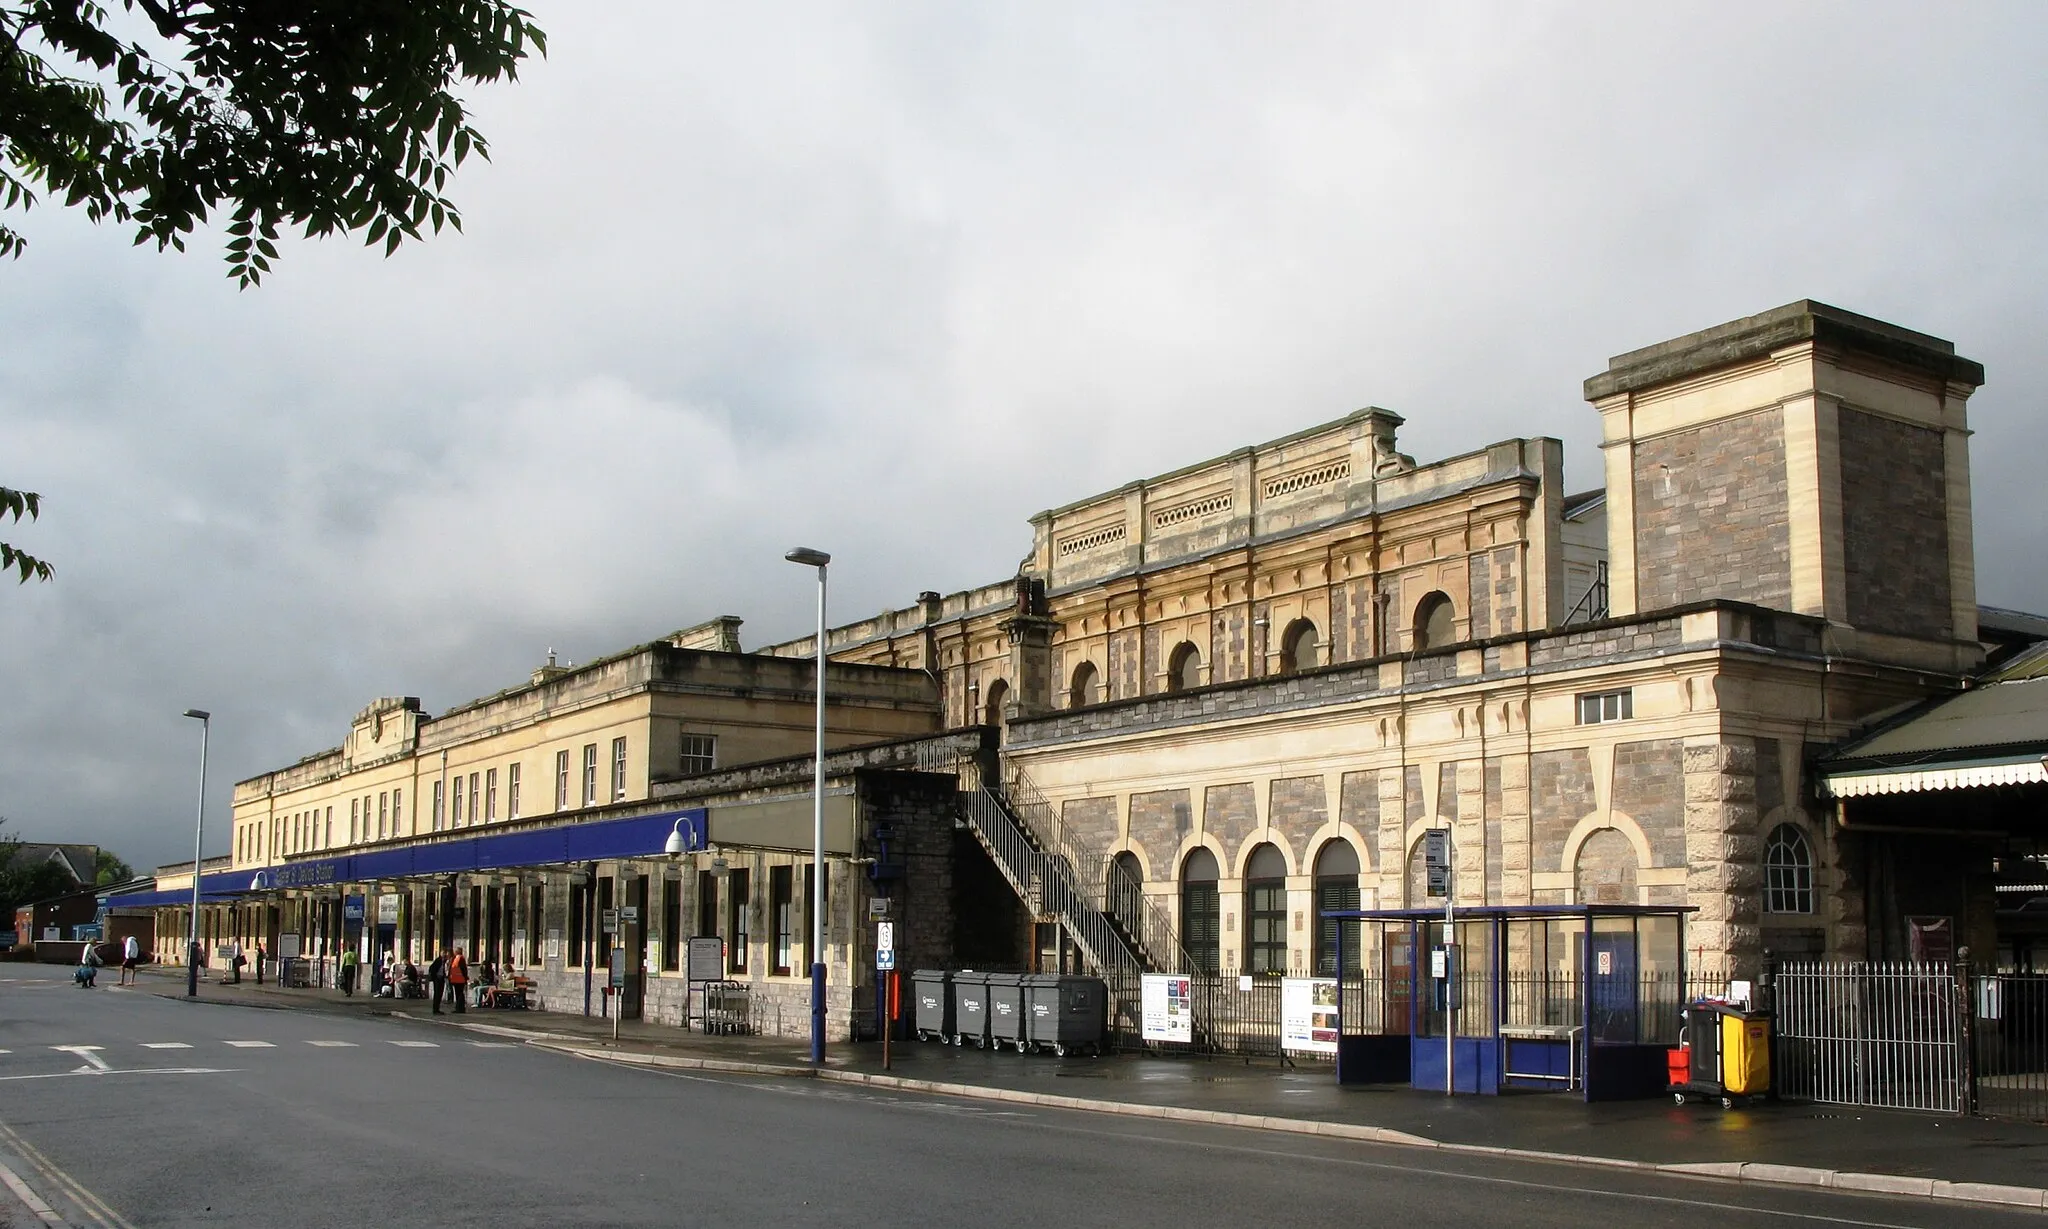 Photo showing: The front of St Davids railway station, Exeter, Devon, England.